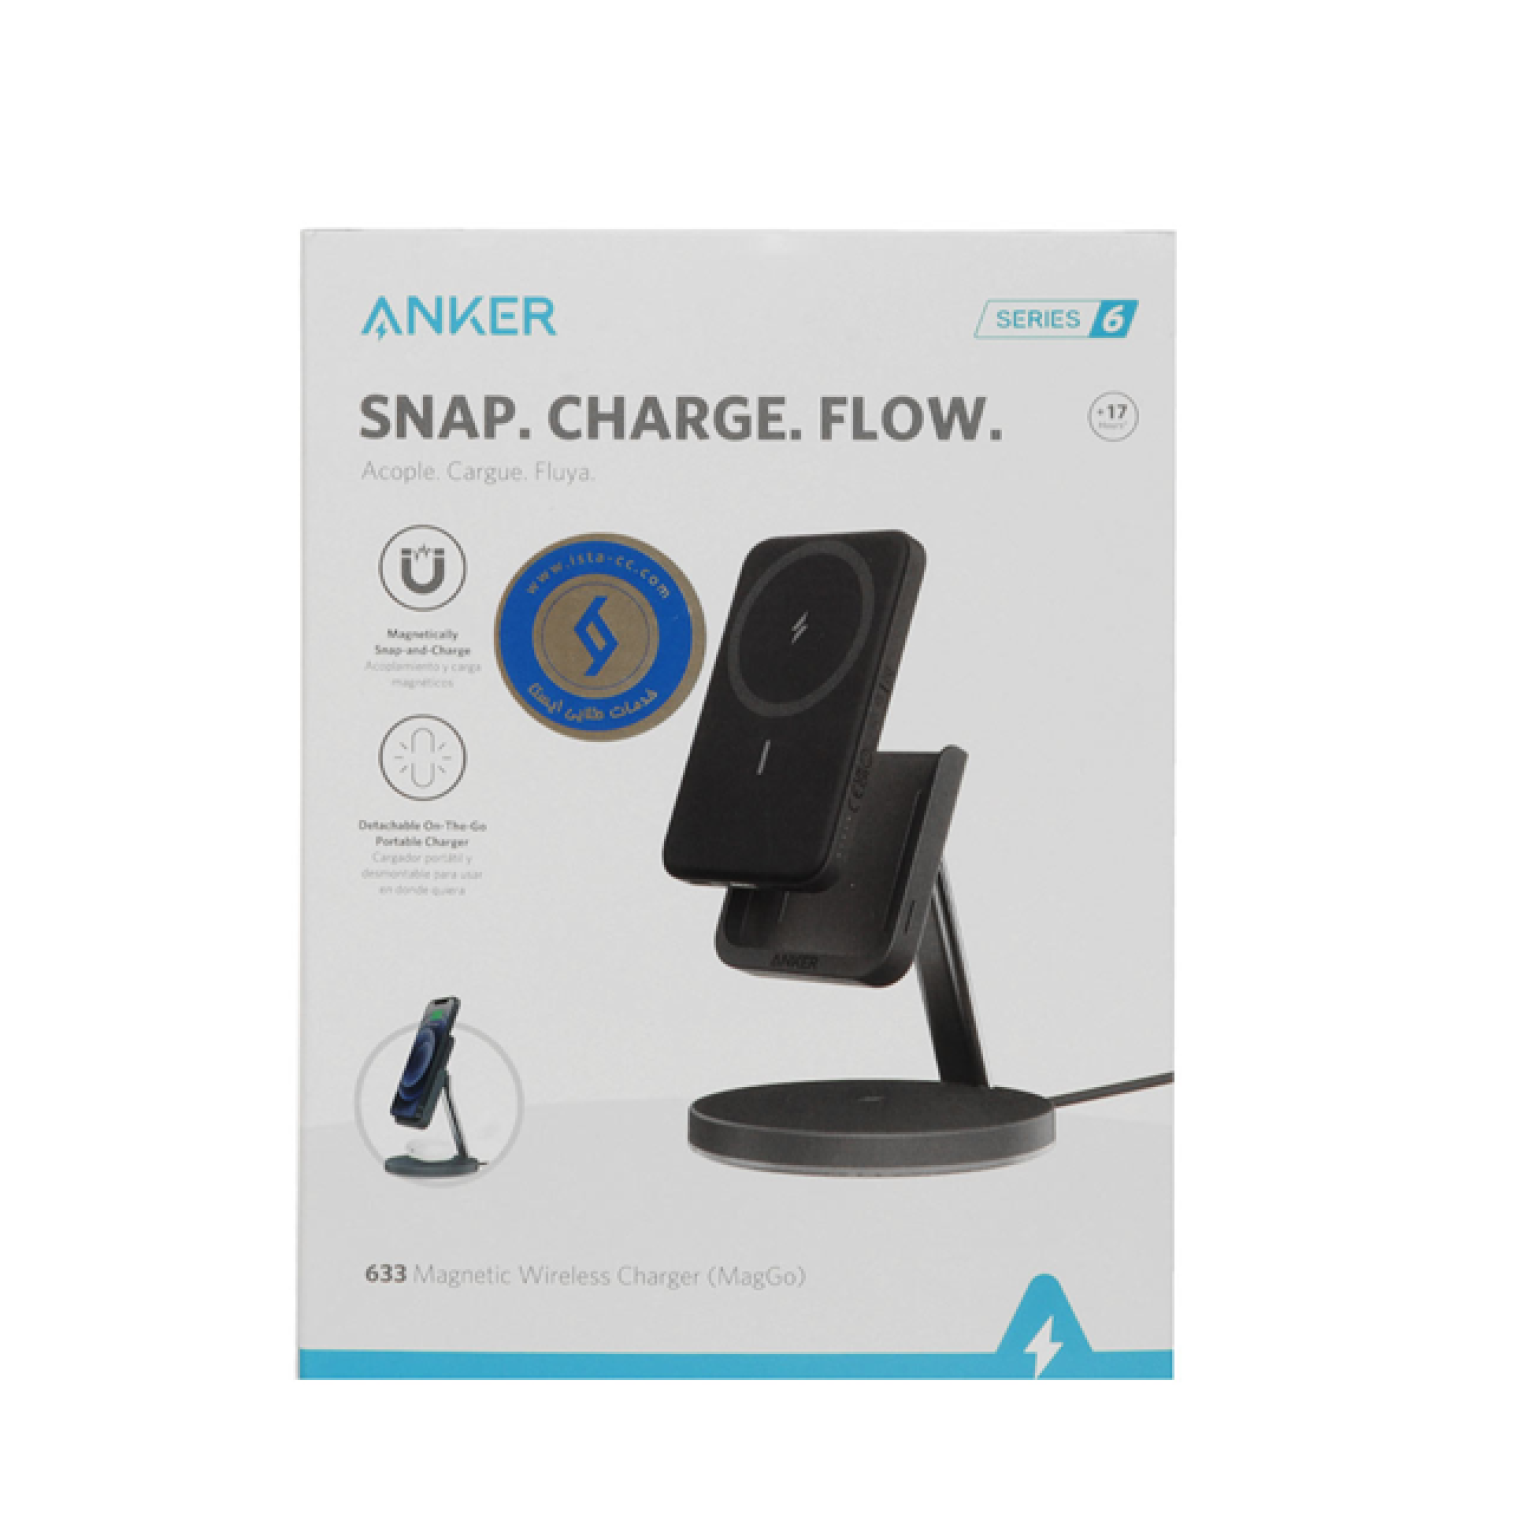 ANKER 2 way wireless charger model B25A7211 black 1